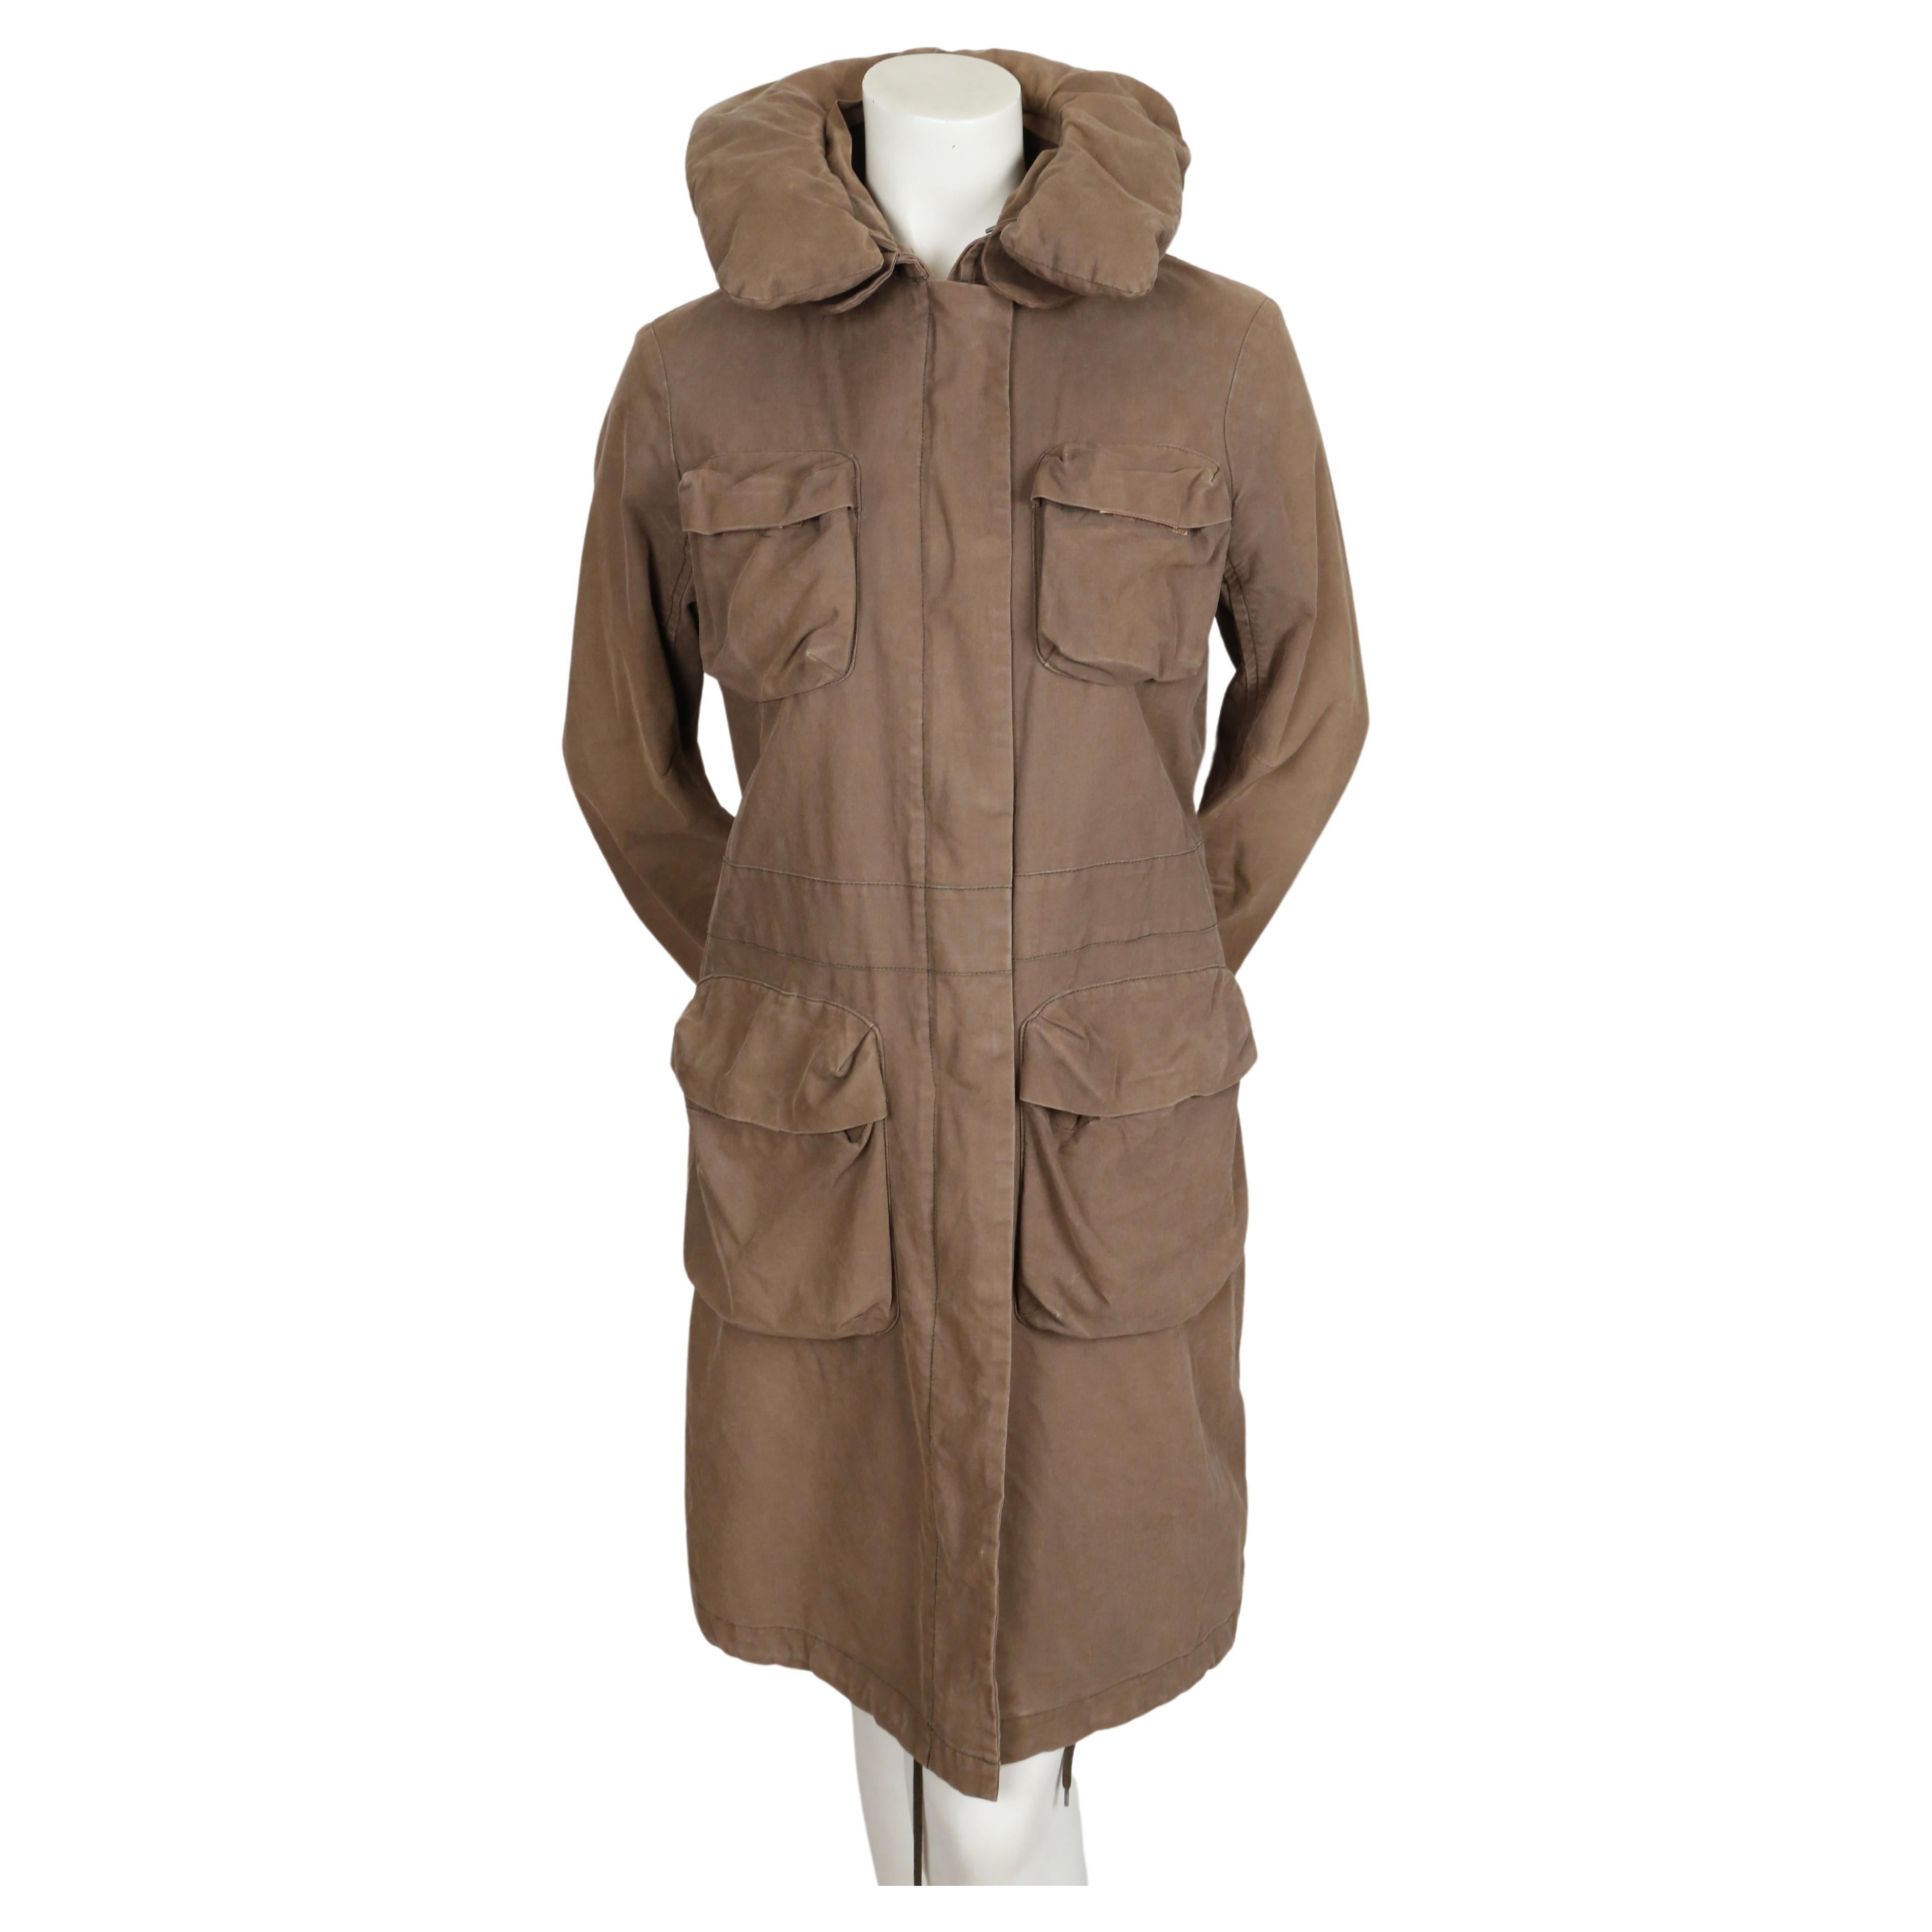 Khaki brown/green cotton parka coat with padded collar and bondage straps designed by Helmut Lang as seen on the fall 1999 runway. Italian size 40. Approximate measurements: shoulder 16.5